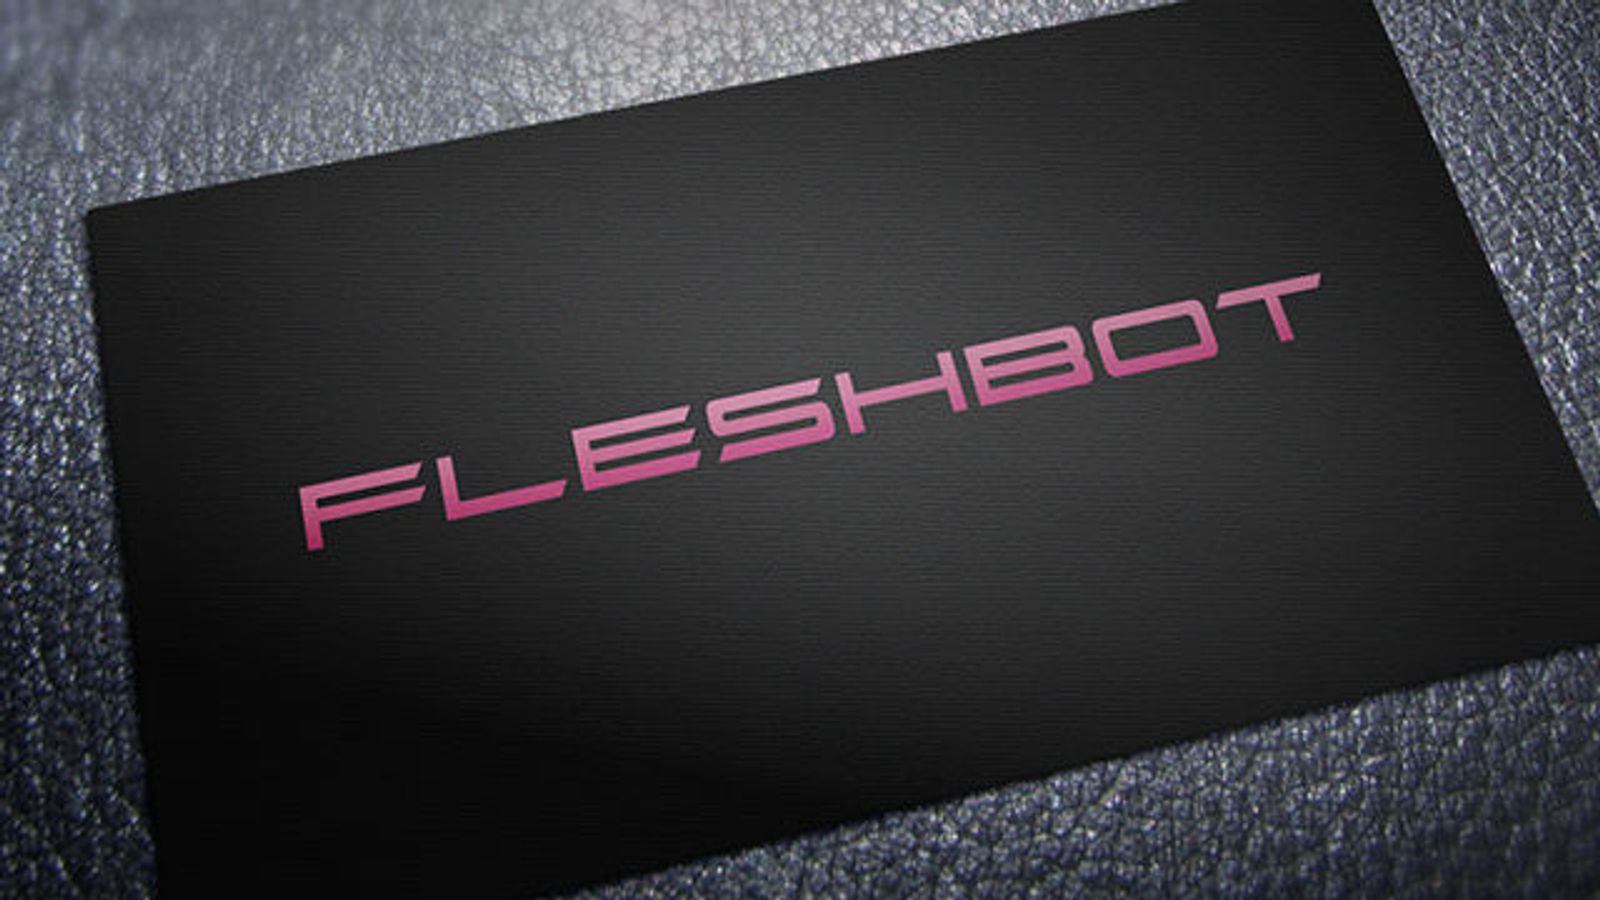 Mr. Skin Parent Launches Redesigned Fleshbot.com